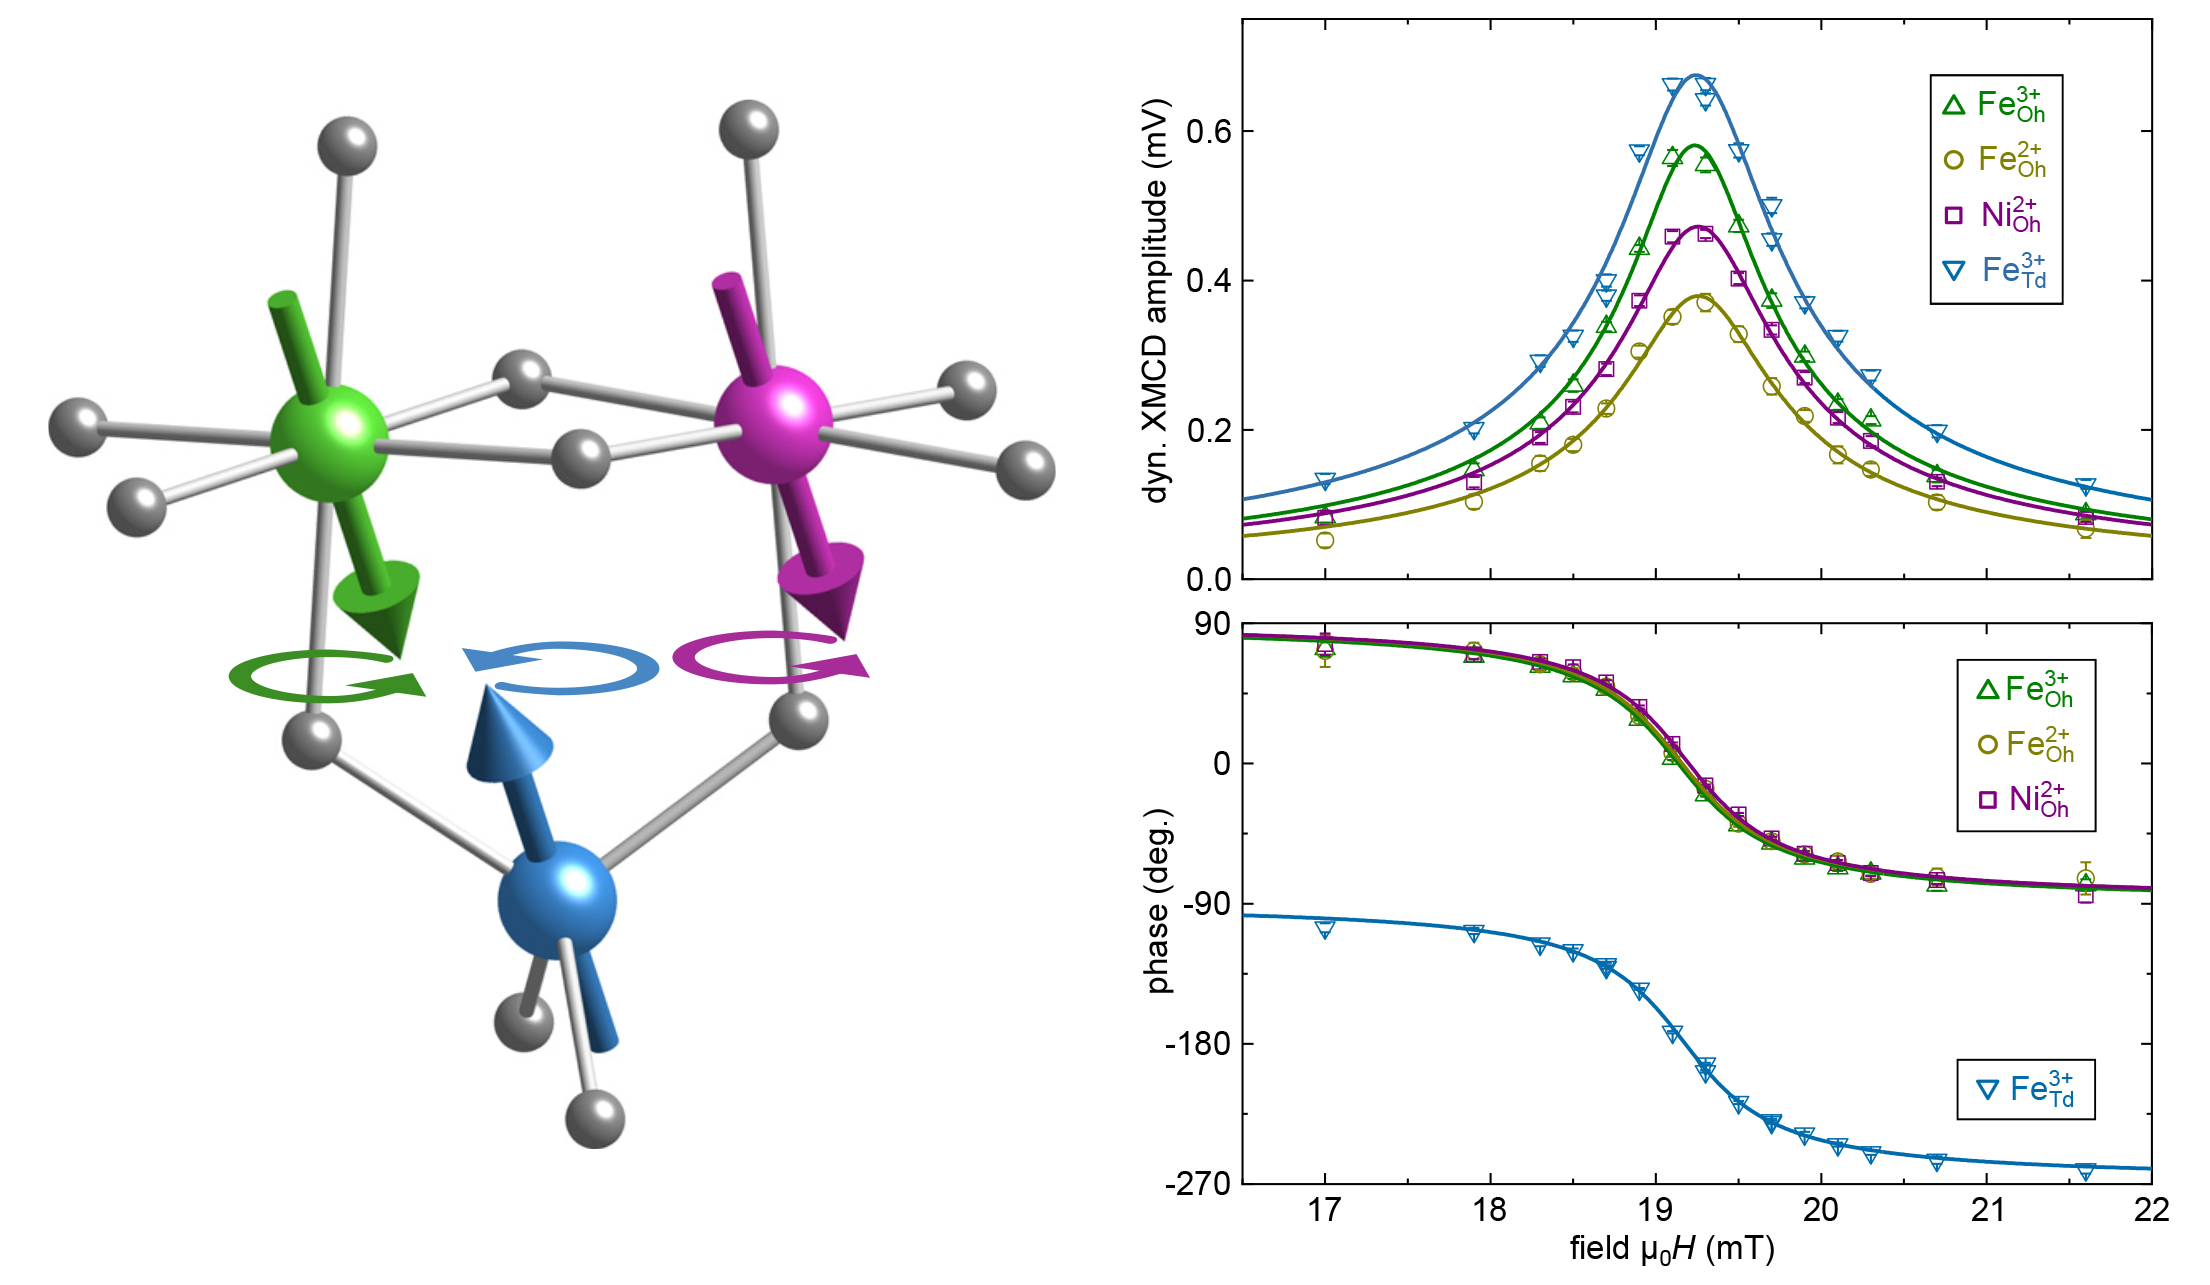 Left: A ball-and-stick depiction of octahedrally coordinated iron and nickel cations and a tetrahedrally coordinated iron cation. Circular arrows depict precession directions. Right: Two graphs as described in the caption.